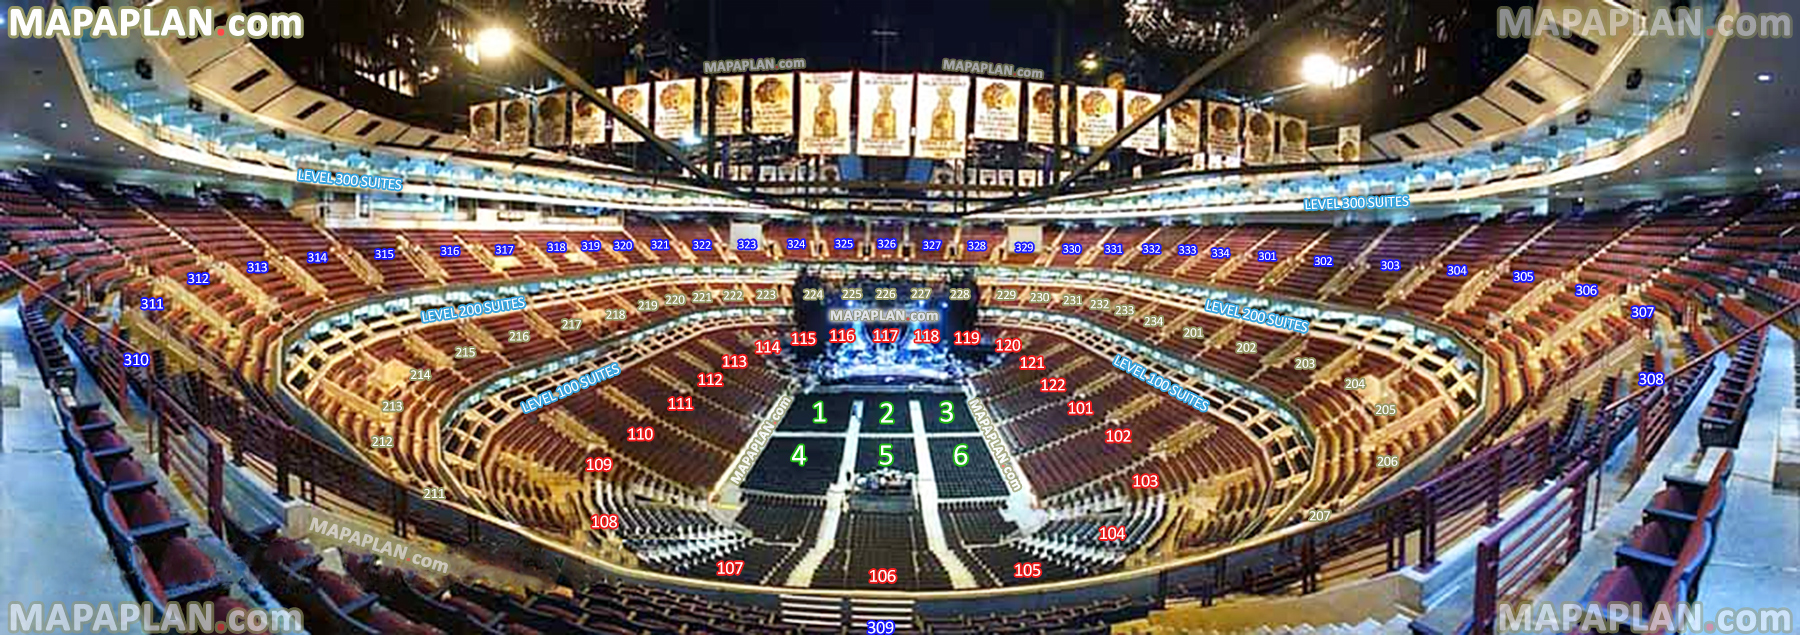 view section 309 row 10 seat 8 virtual interactive 3d behind stage tour inside pictures general admission ga Chicago United Center seating chart